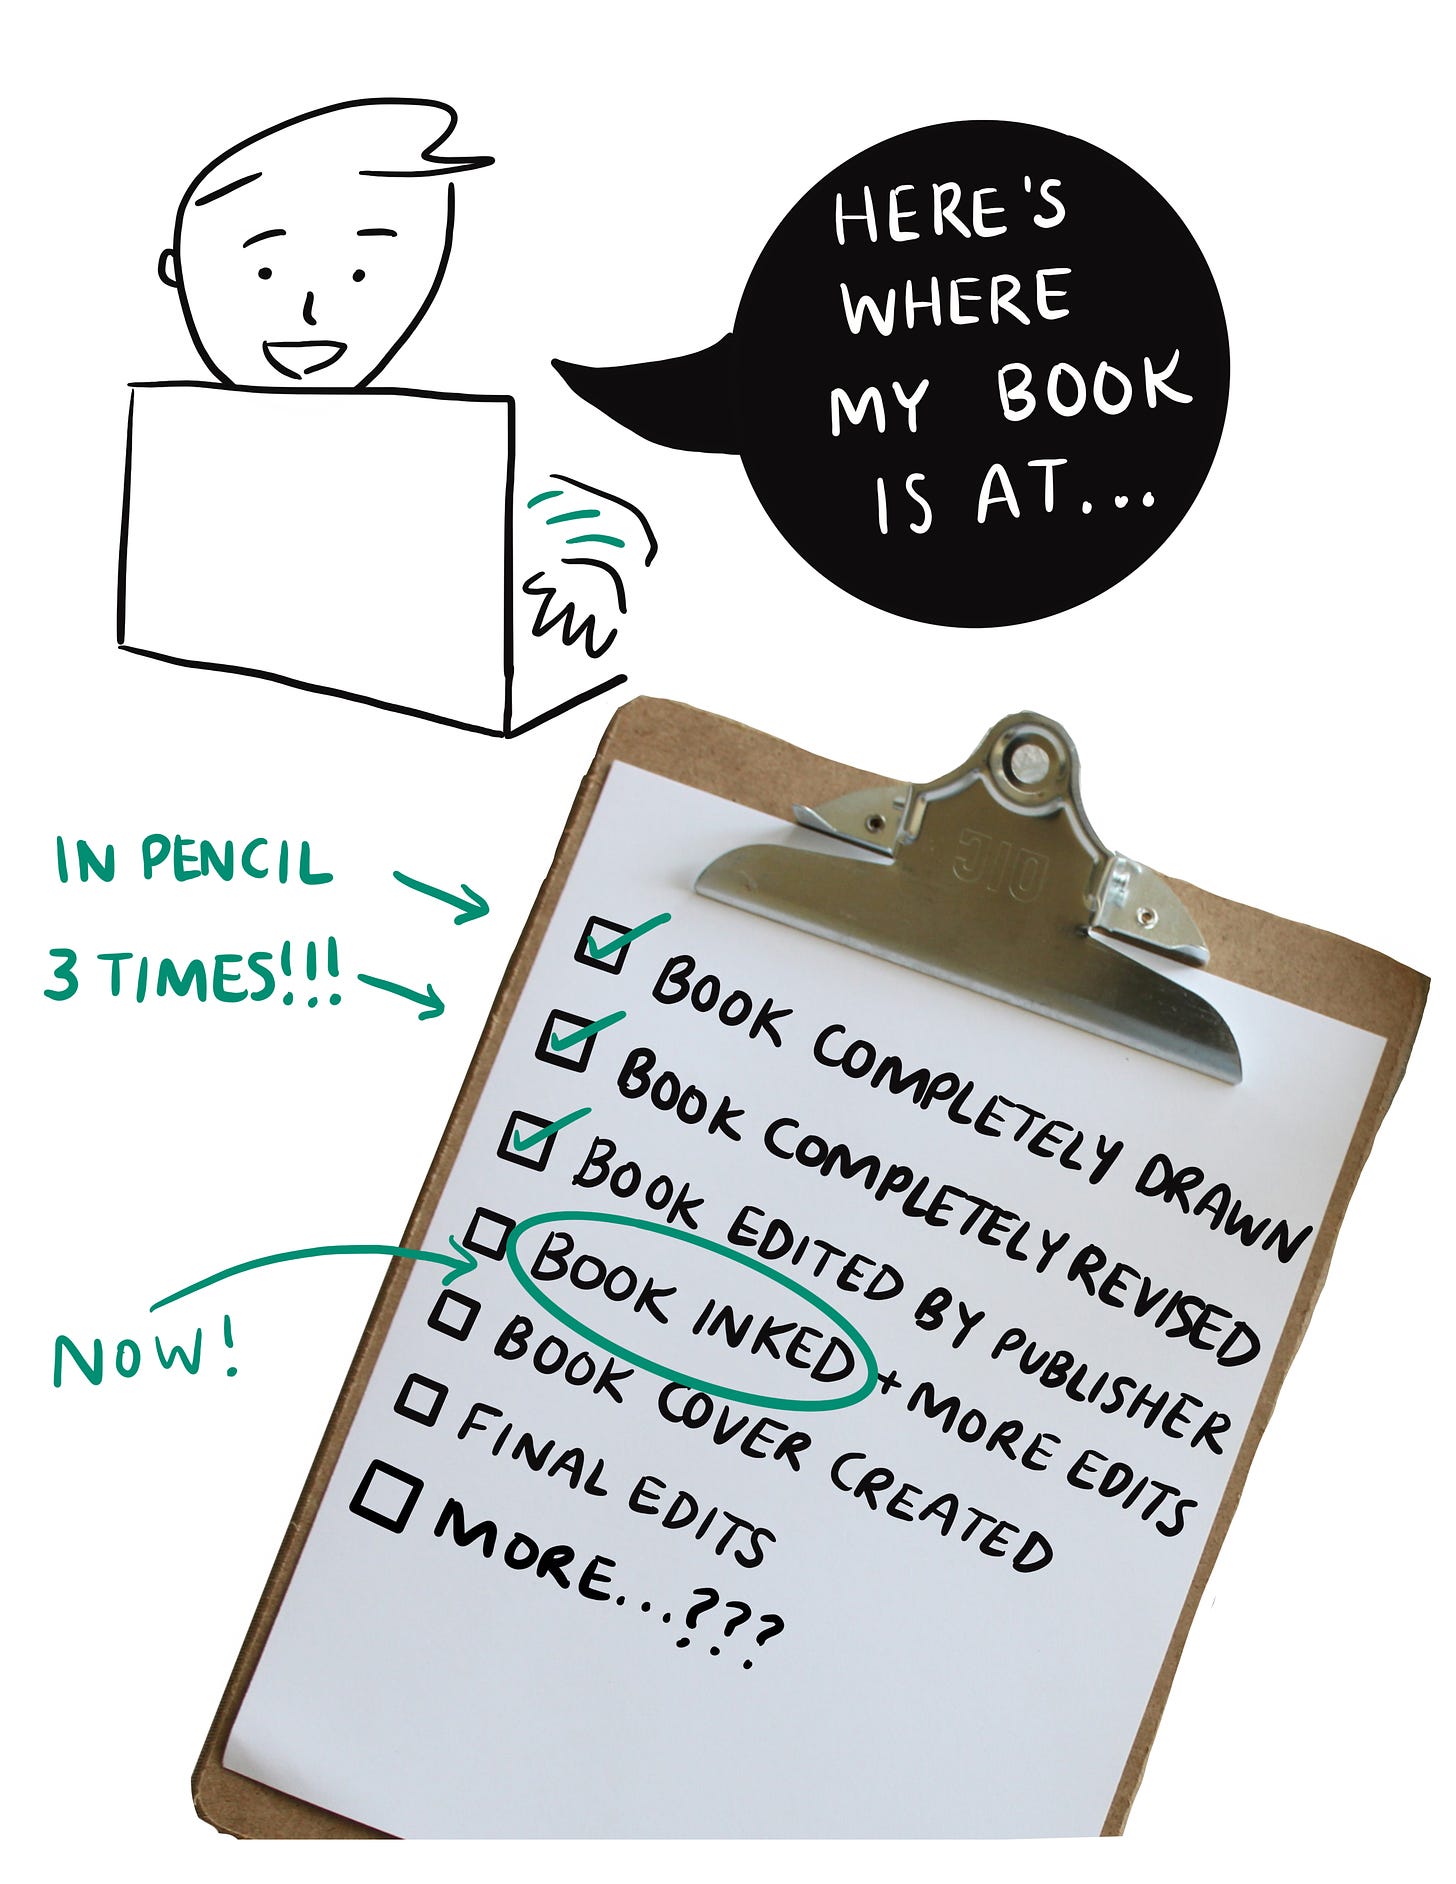 The cartoonist at their laptop saying “here is where my book is at” and a clipboard with a checklist of the book process steps